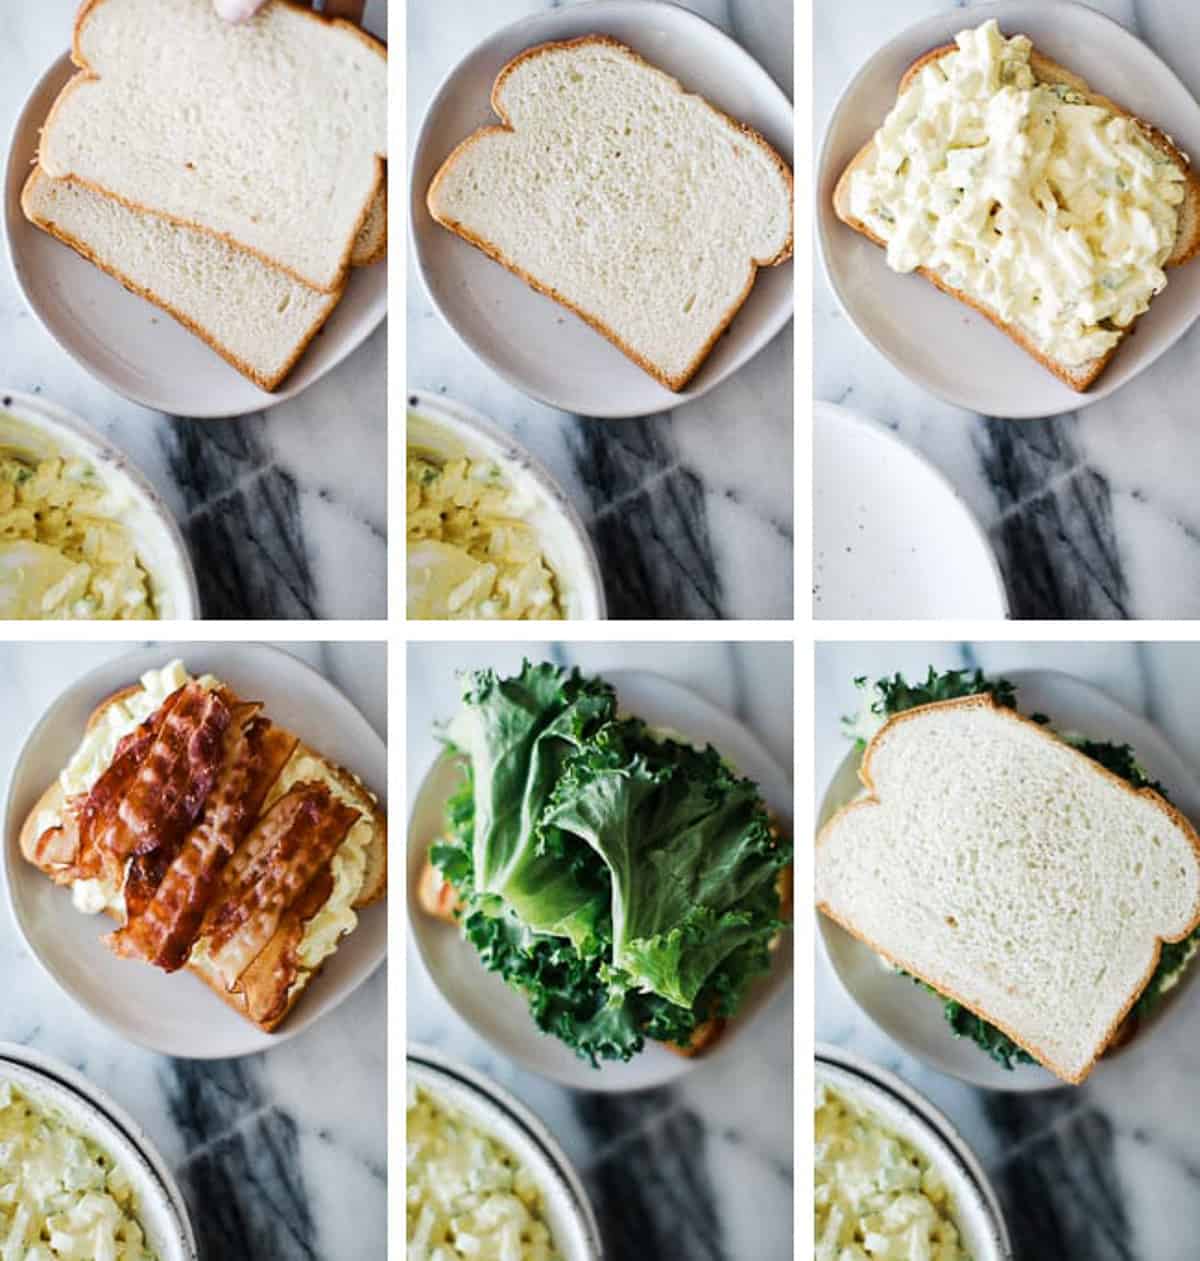 bread, egg salad, bacon and lettuce in several photos being added to sandwich